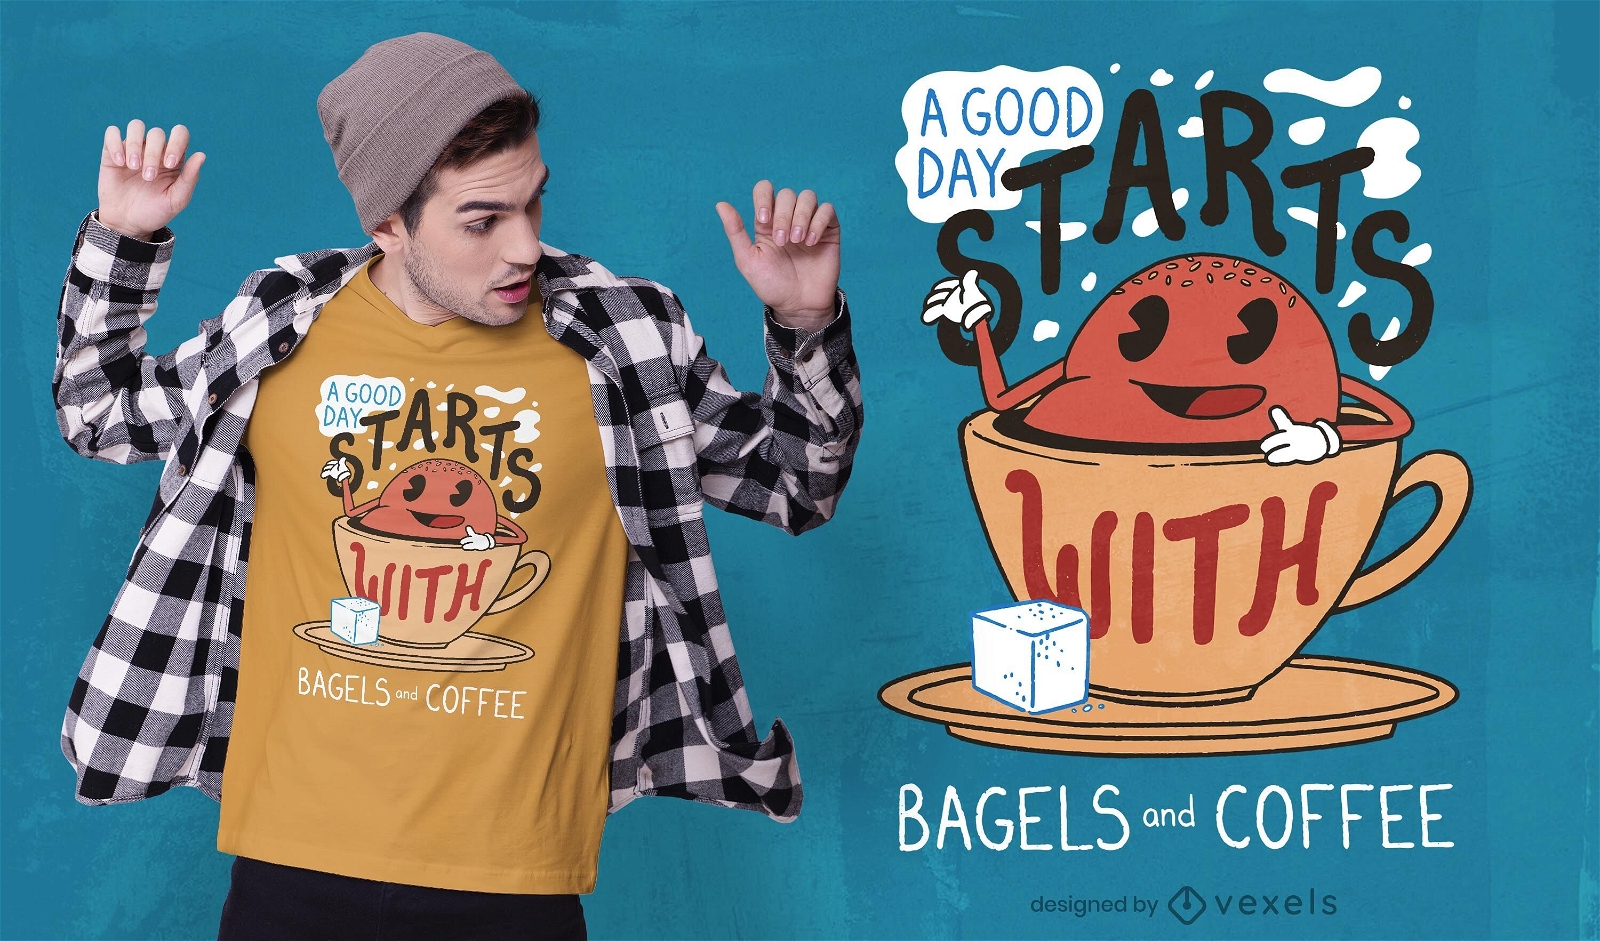 Bagels and coffee t-shirt design